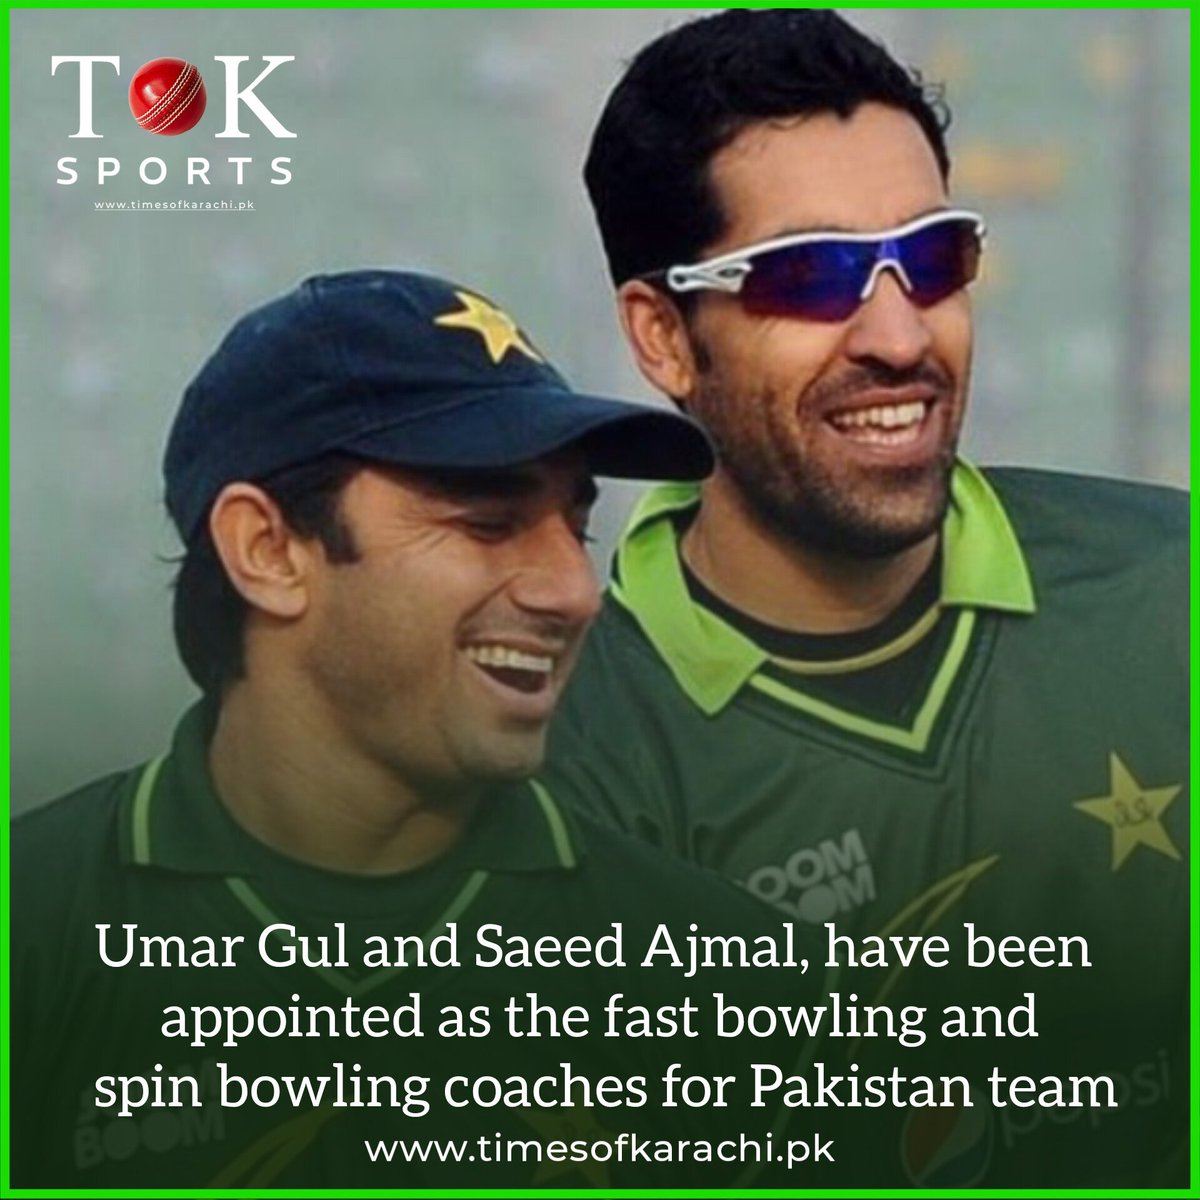 Former Pakistan cricketer Umar Gul and Saeed Ajmal have joined the national men’s side as the fast-bowling and spin-bowling coaches of Pakistan team

#TOKSports #UmarGul #SaeedAjmal